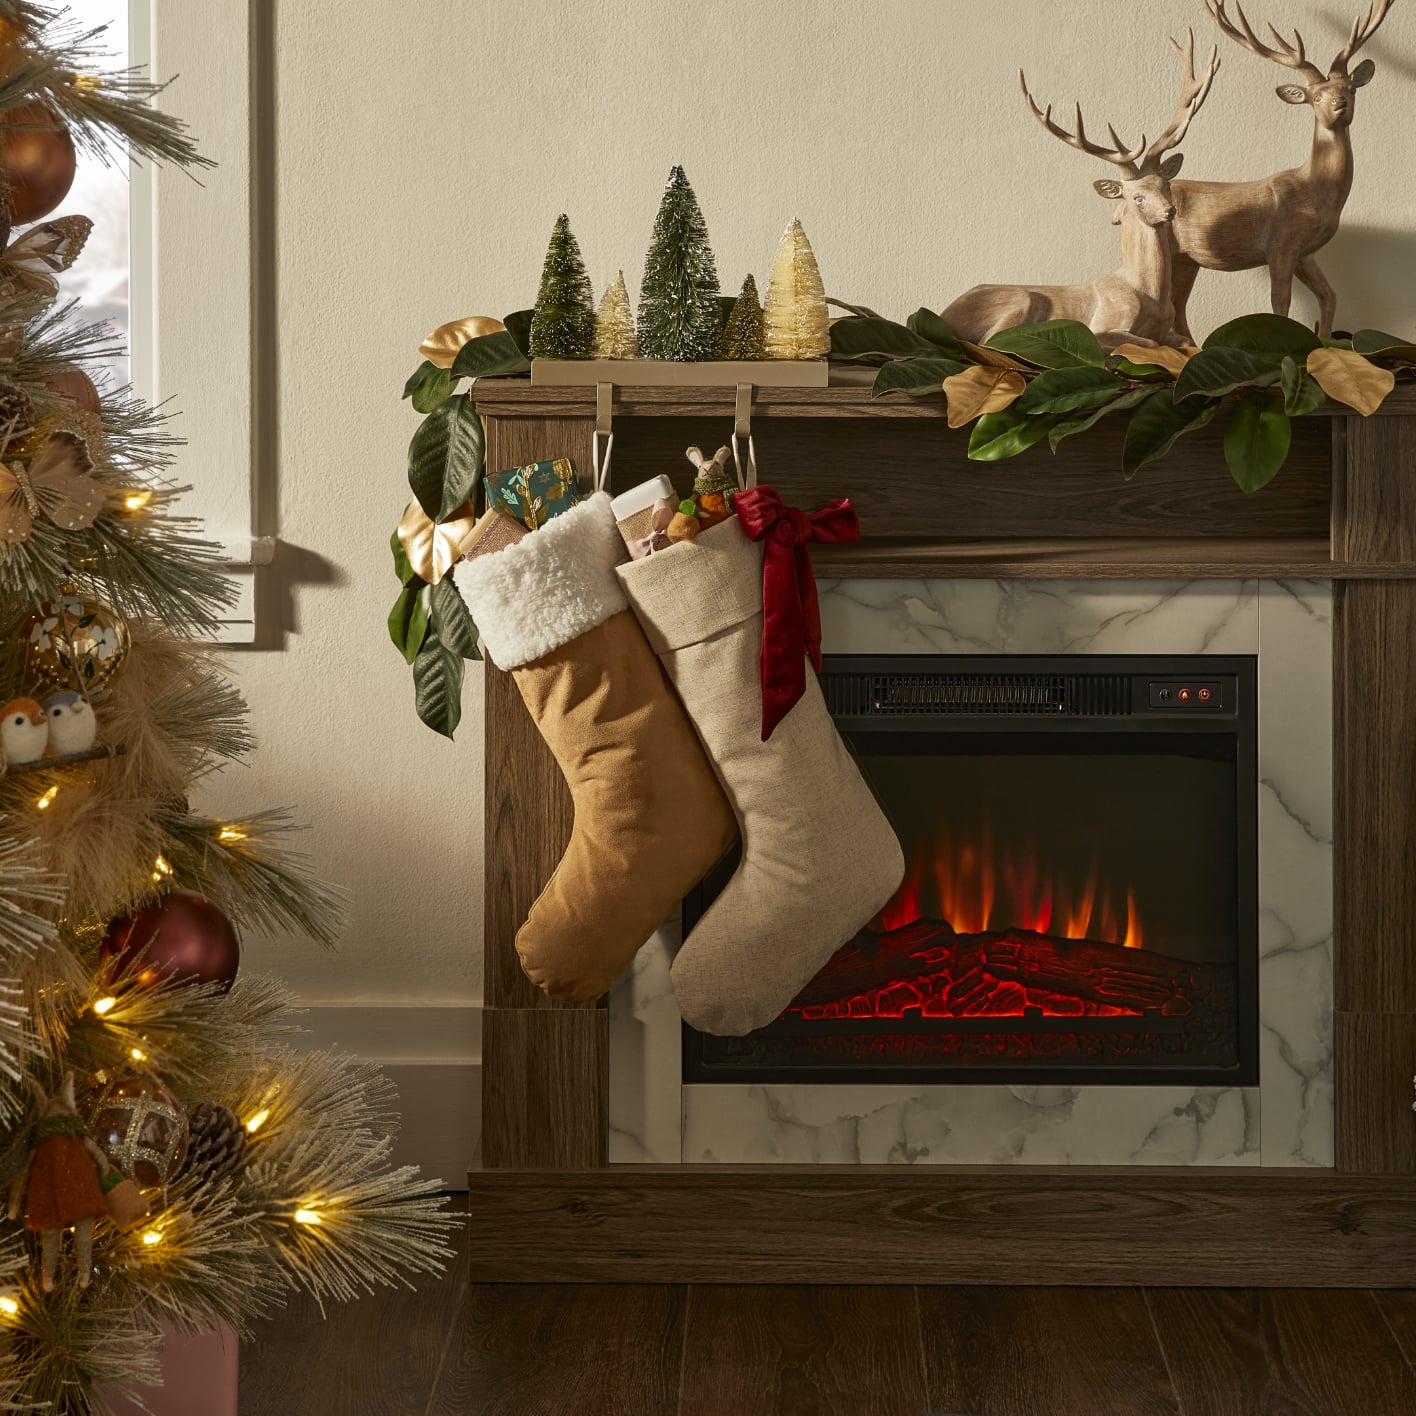 CANVAS Winter Garden stockings hanging on fireplace.